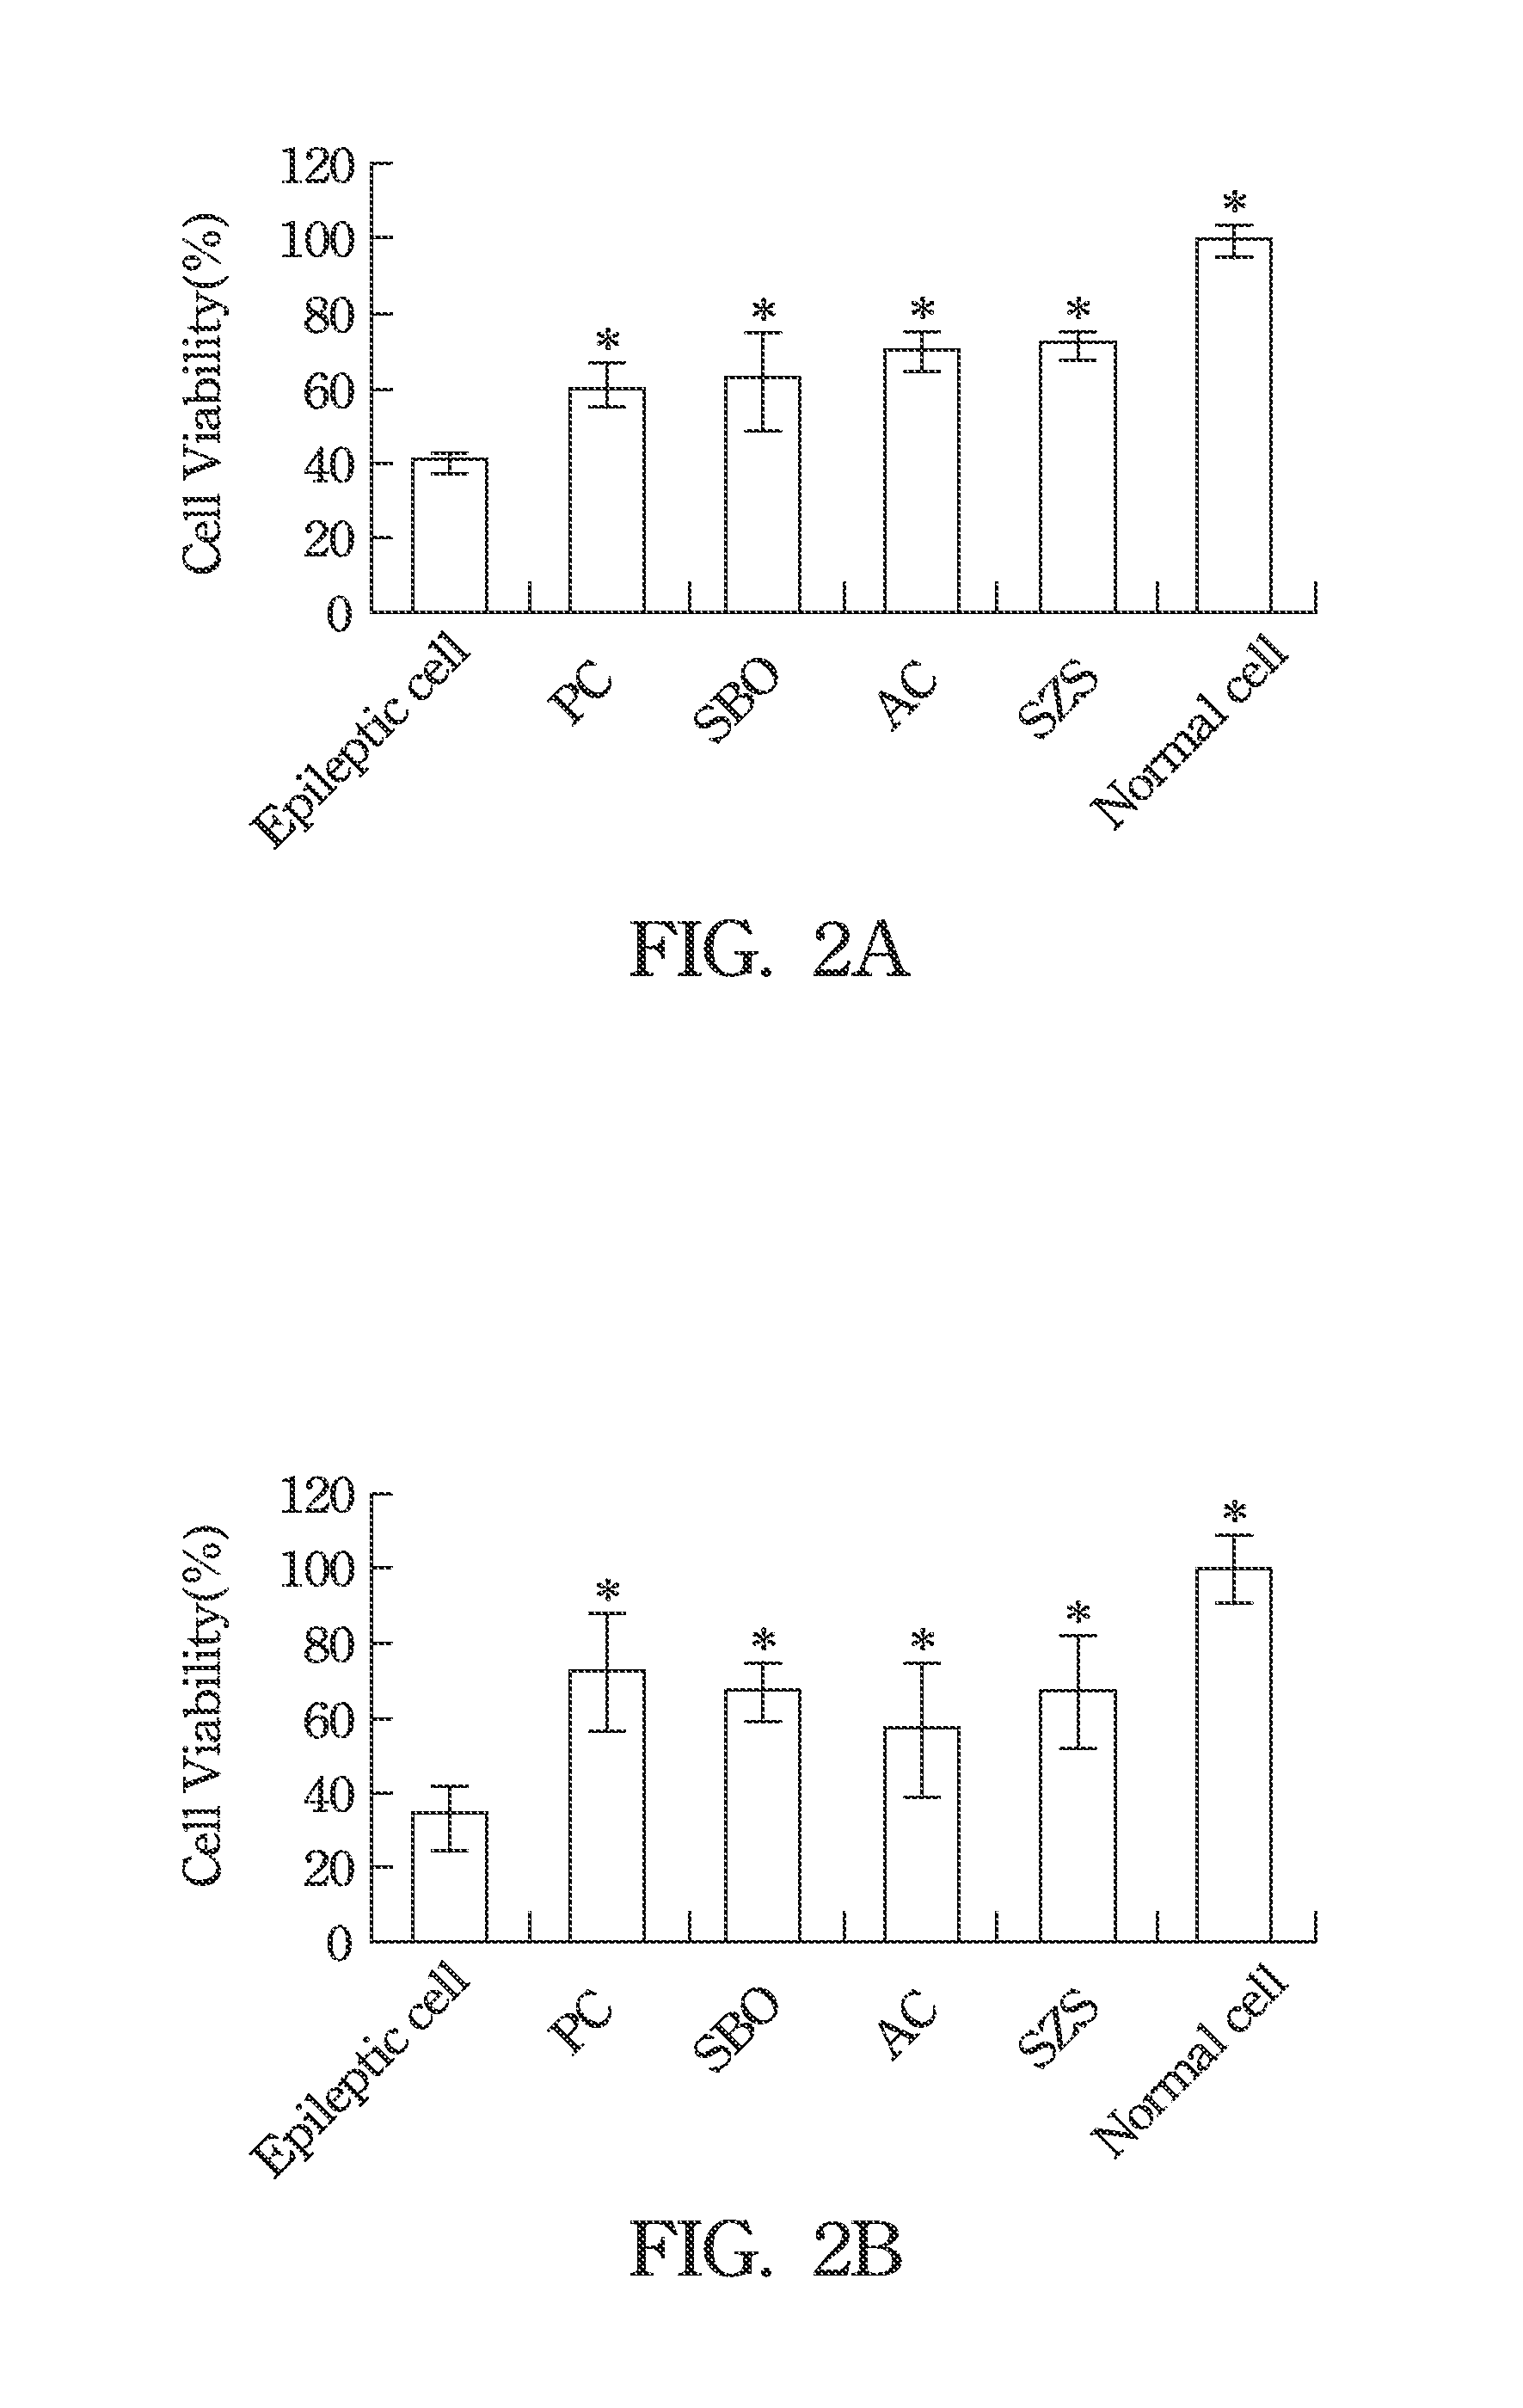 Chinese Herbal Aqueous Extract Having Anti-Anxiety Activities and Method of In Vitro Evaluating the Same